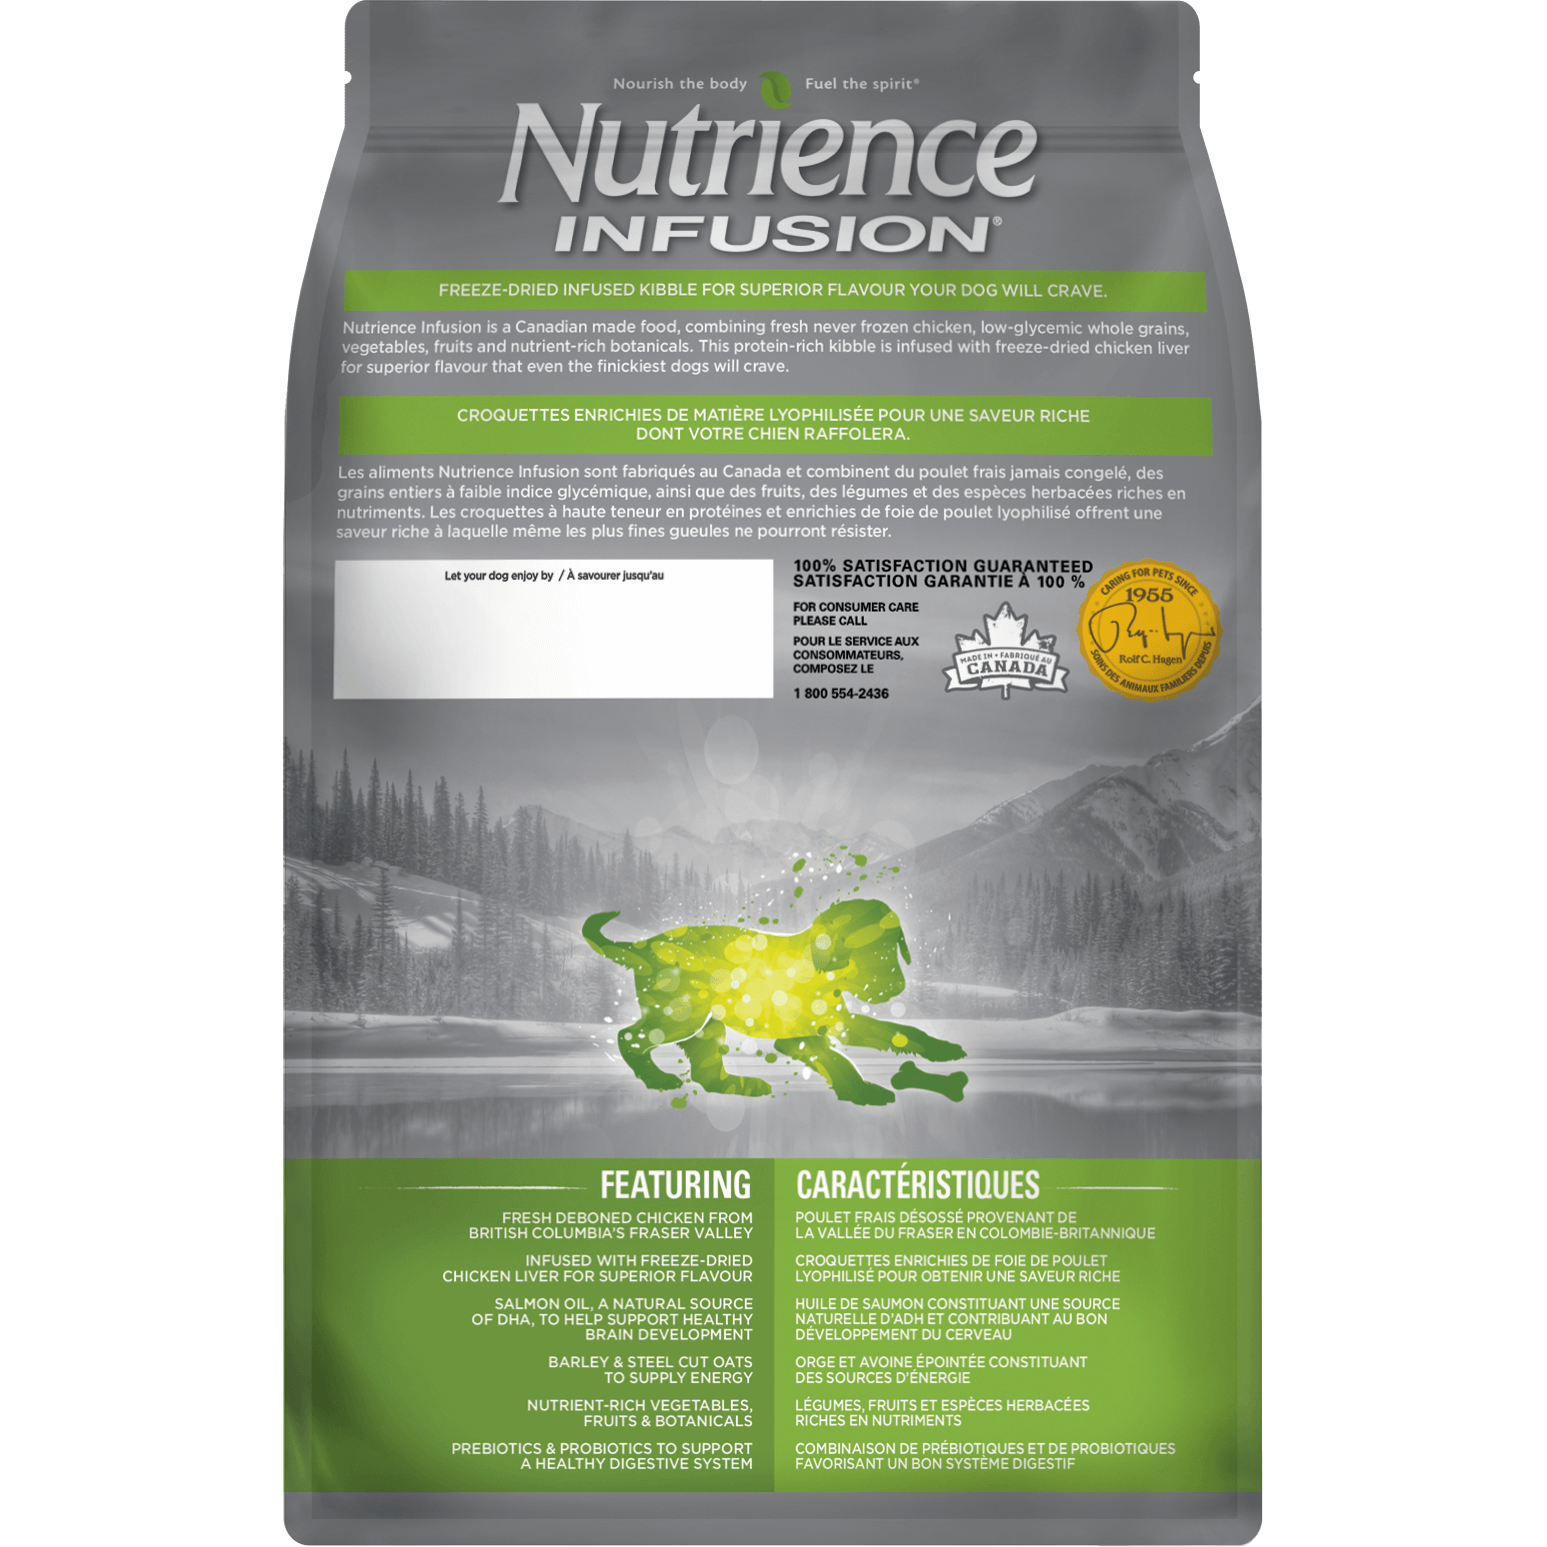 Nutrience Infusion Healthy Puppy Chicken  Dog Food  | PetMax Canada